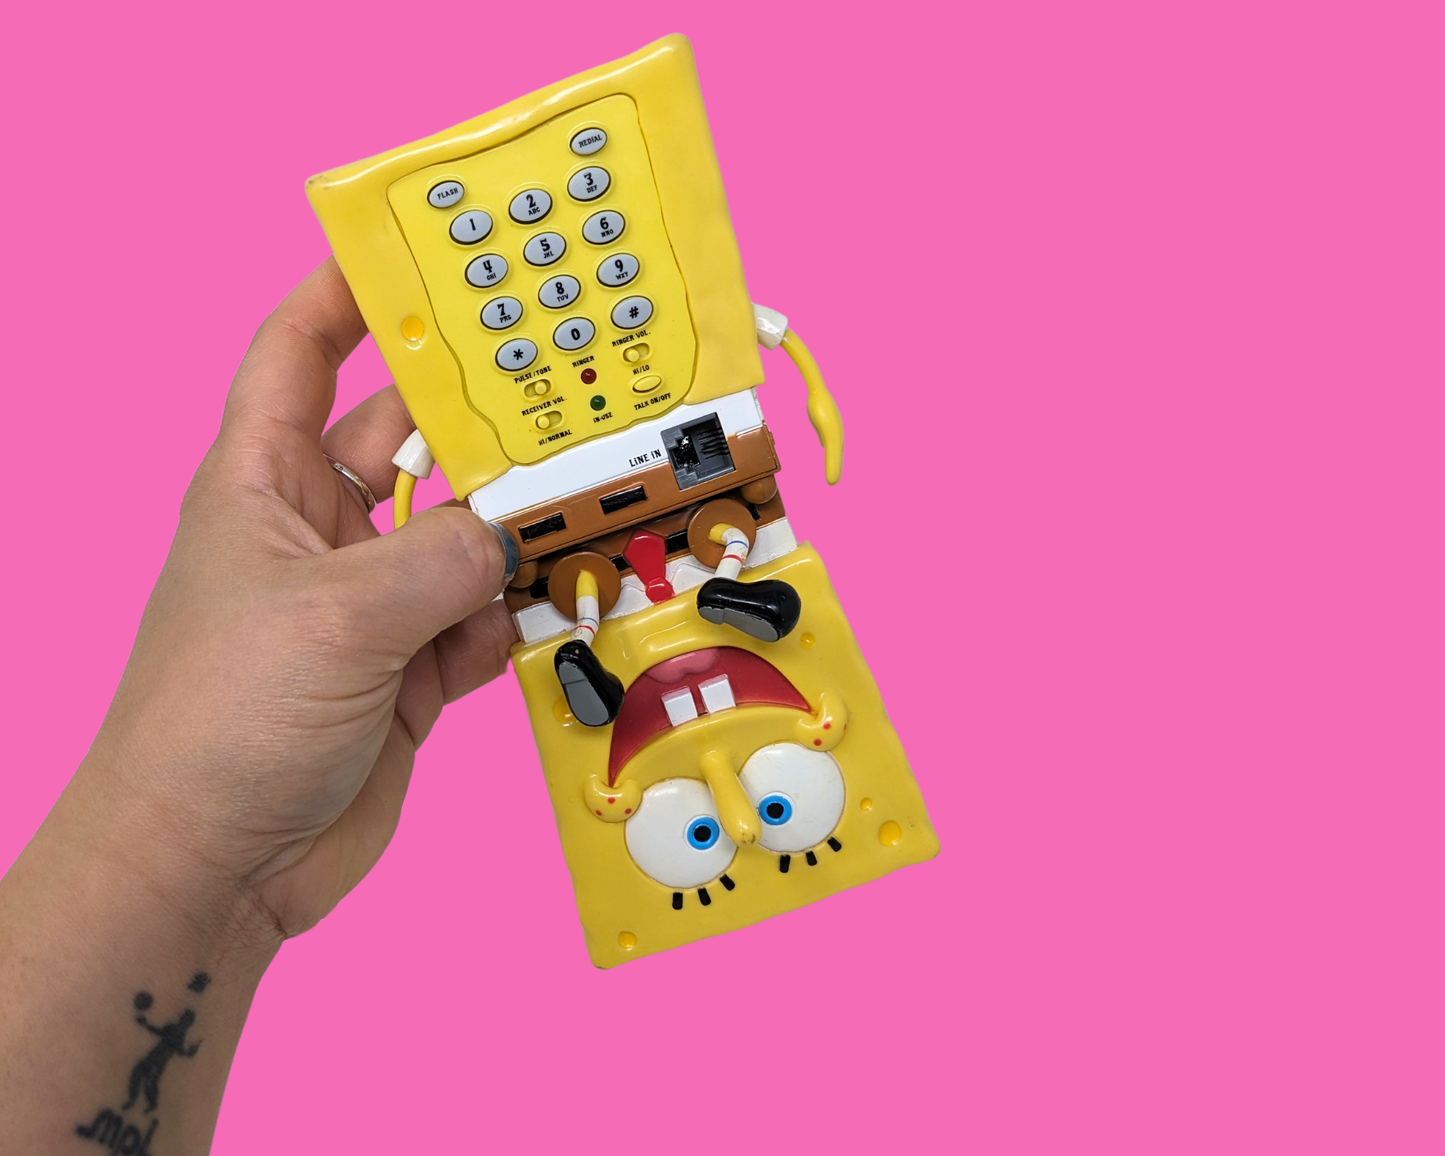 Y2K Sponge Bob Square Pants Telephone, Works But Doesn't Ring